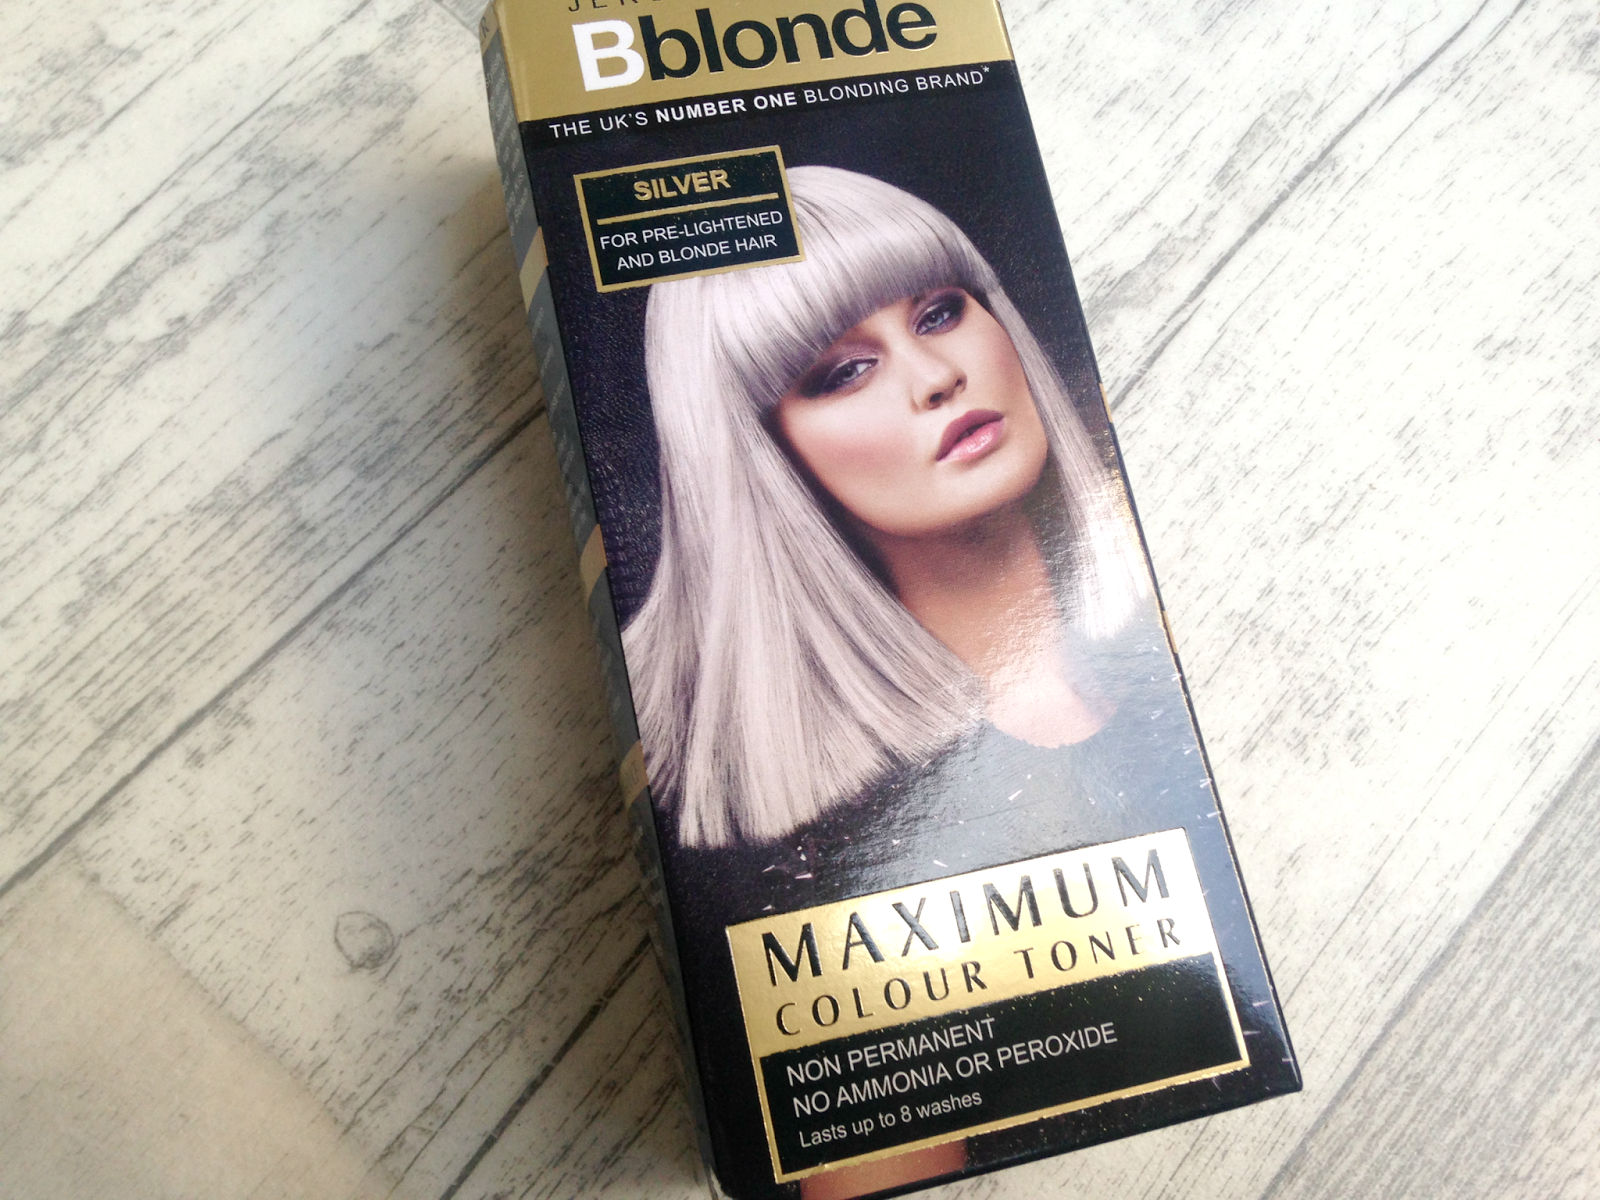 1. "How to Achieve Blonde Hair with Silver Ends" - wide 9